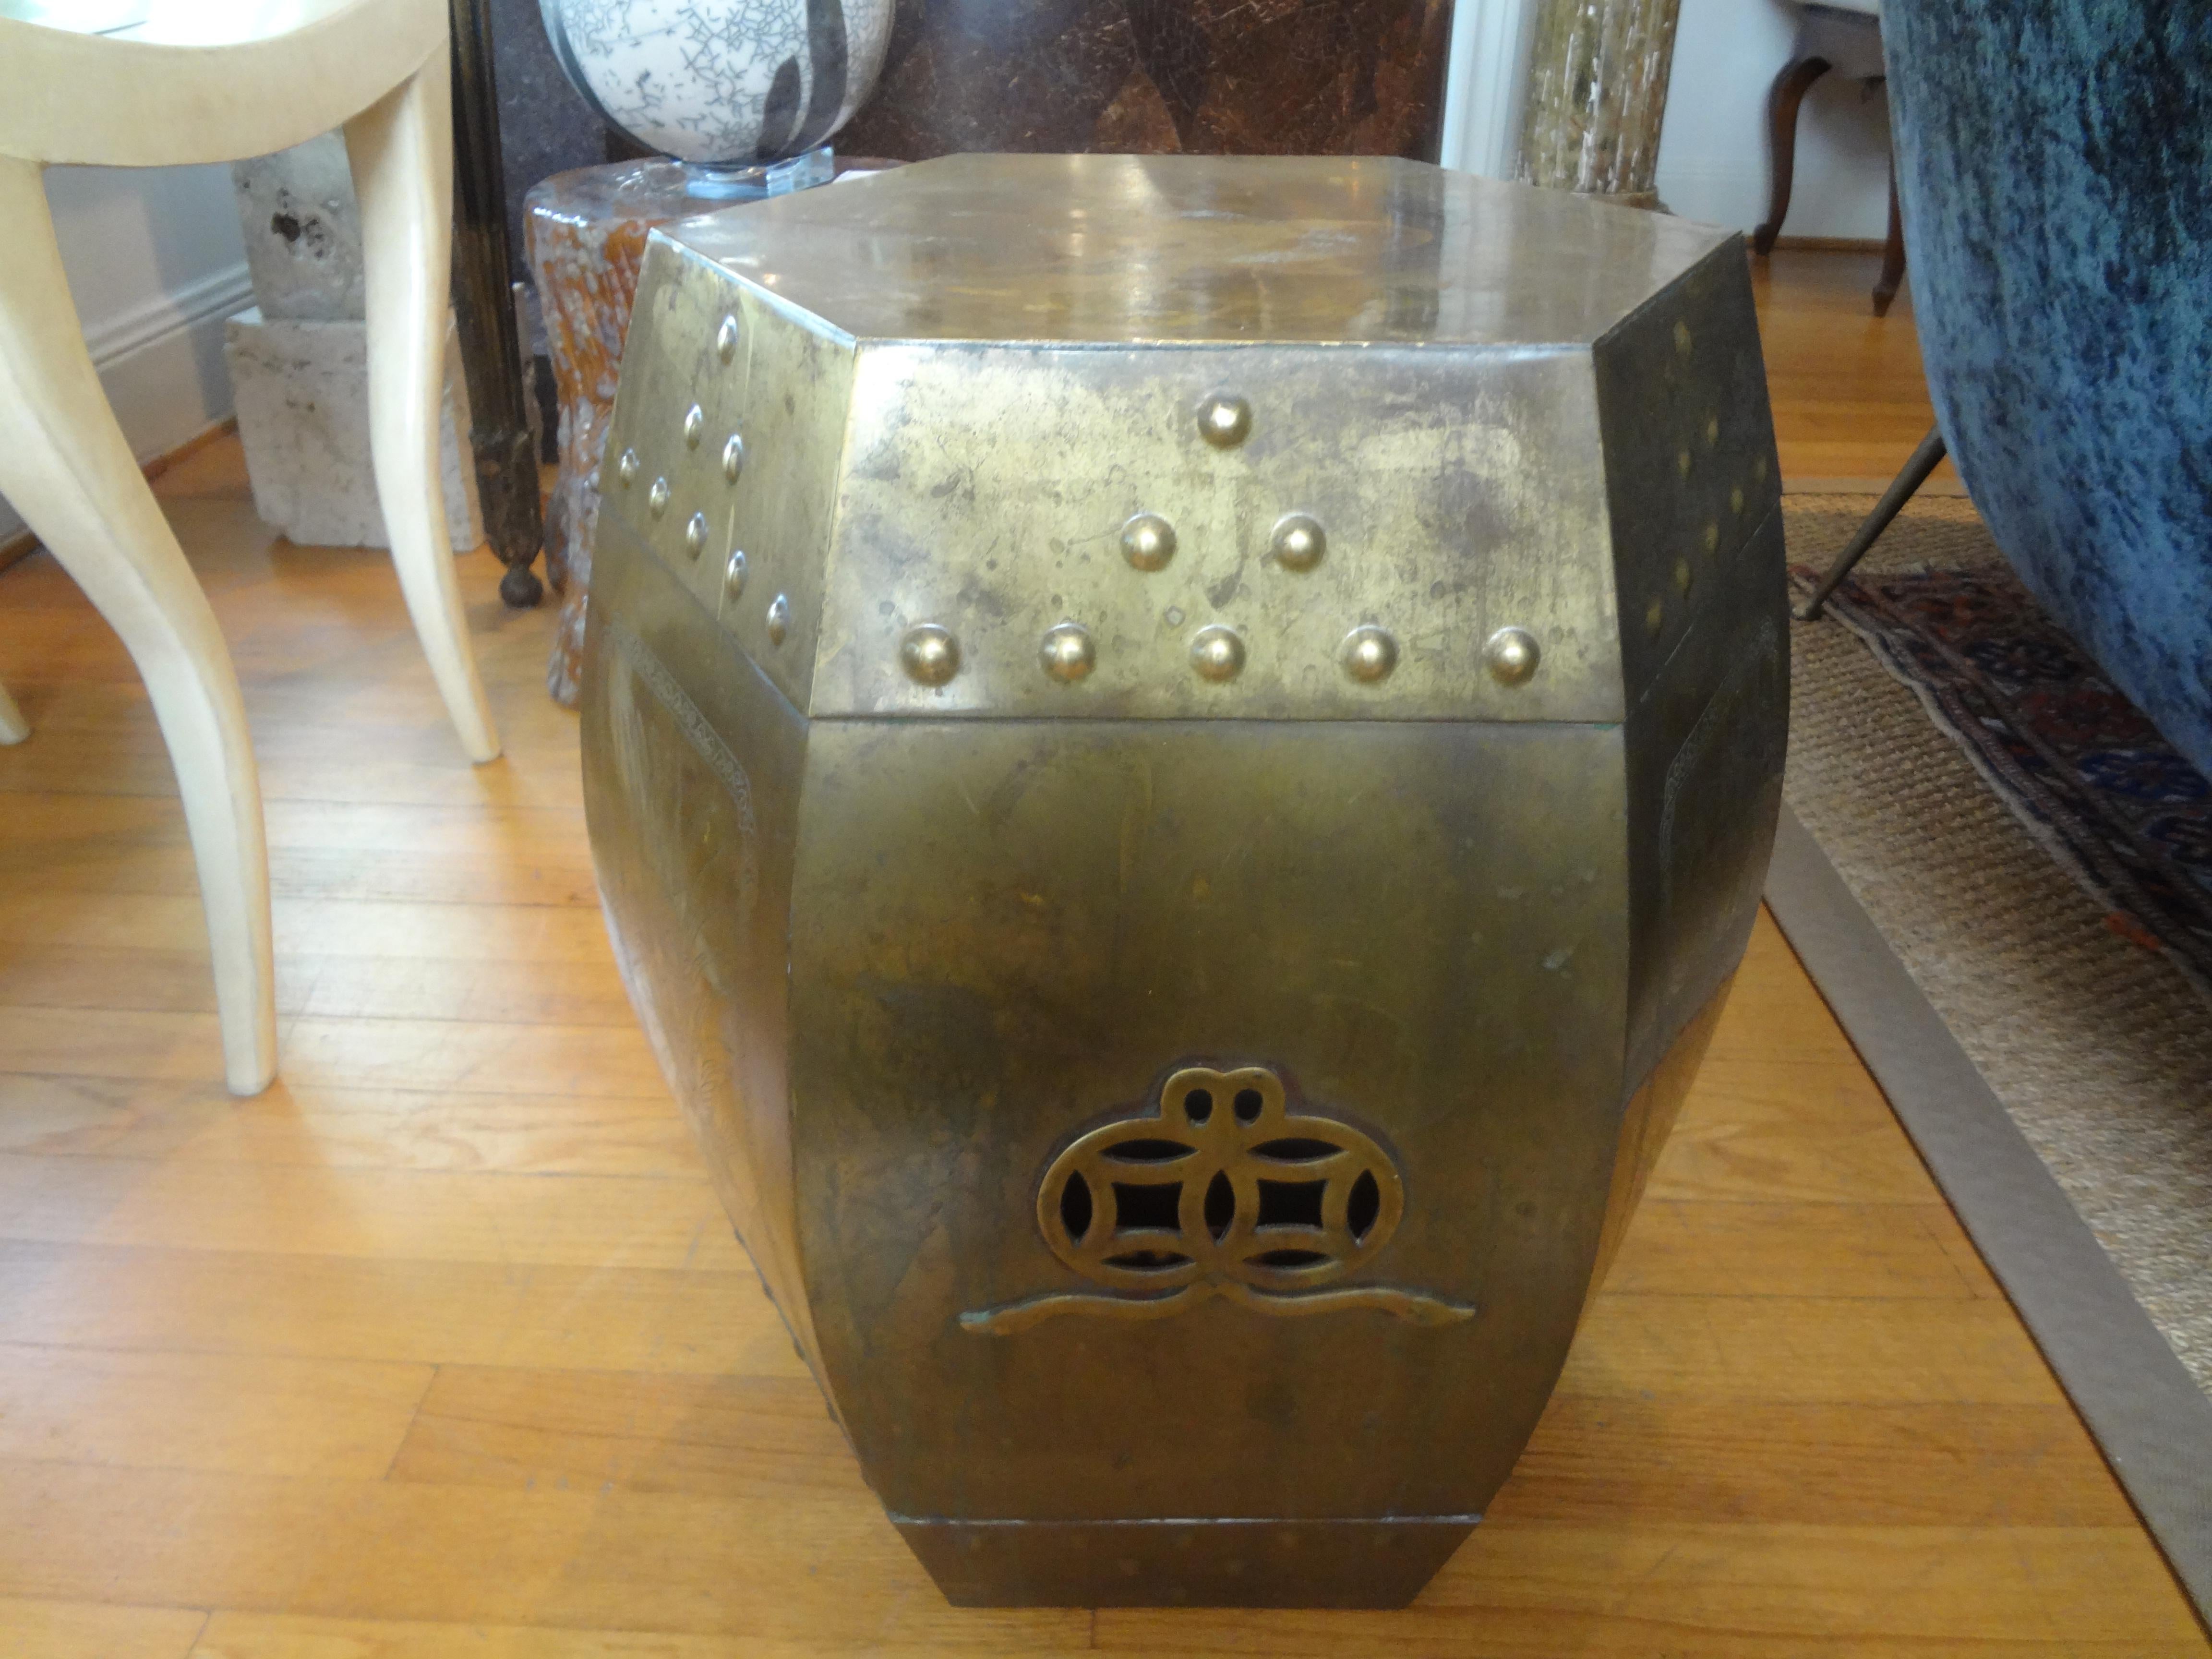 Hollywood Regency brass garden seat or table. Our vintage brass garden stool has a beautiful etched design. This large scale hollywood regency or Asian modern brass garden seat or table would look great in a variety of interiors.
Tony Duquette used